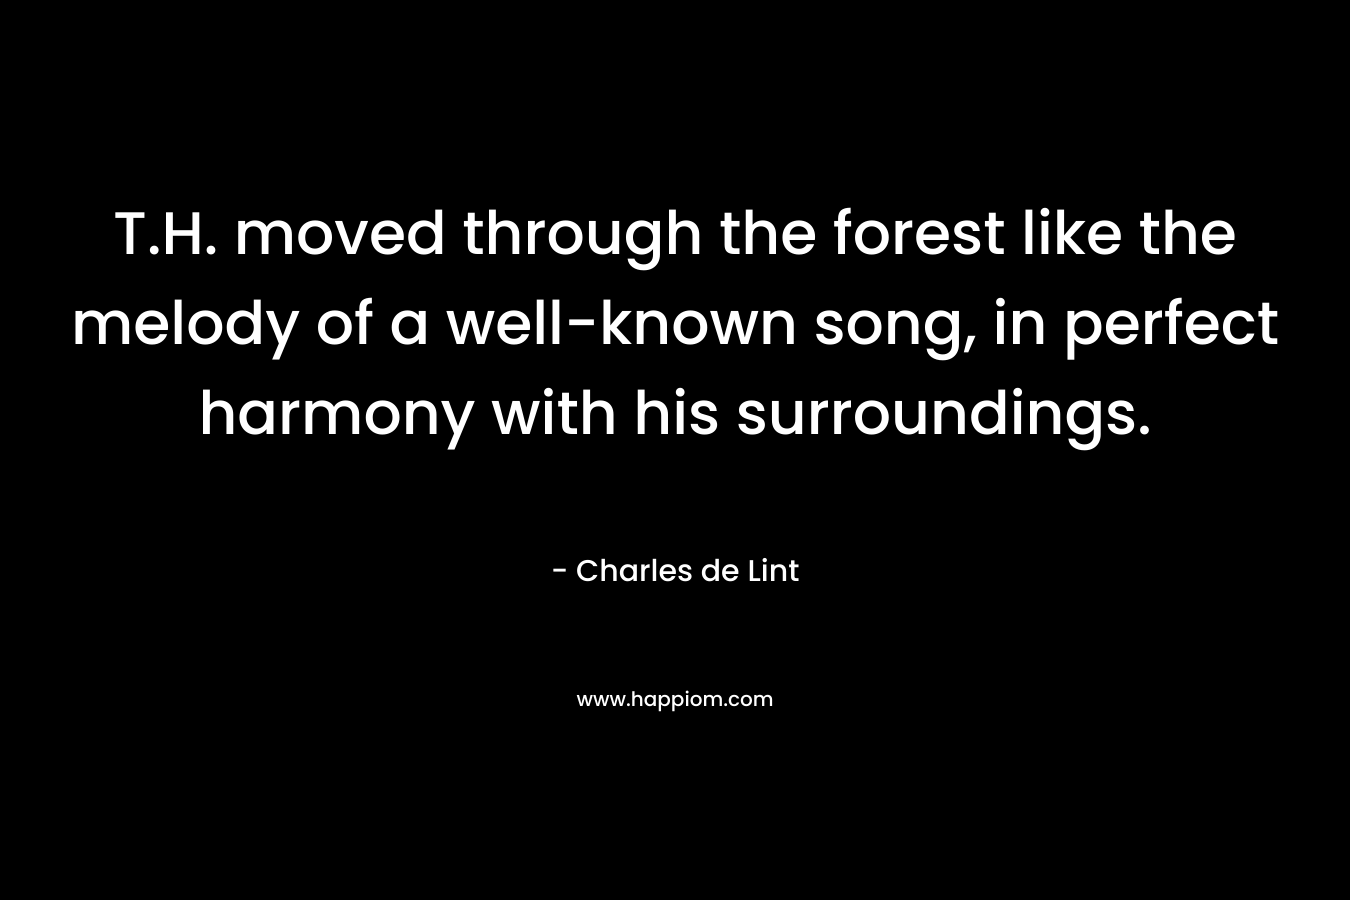 T.H. moved through the forest like the melody of a well-known song, in perfect harmony with his surroundings. – Charles de Lint